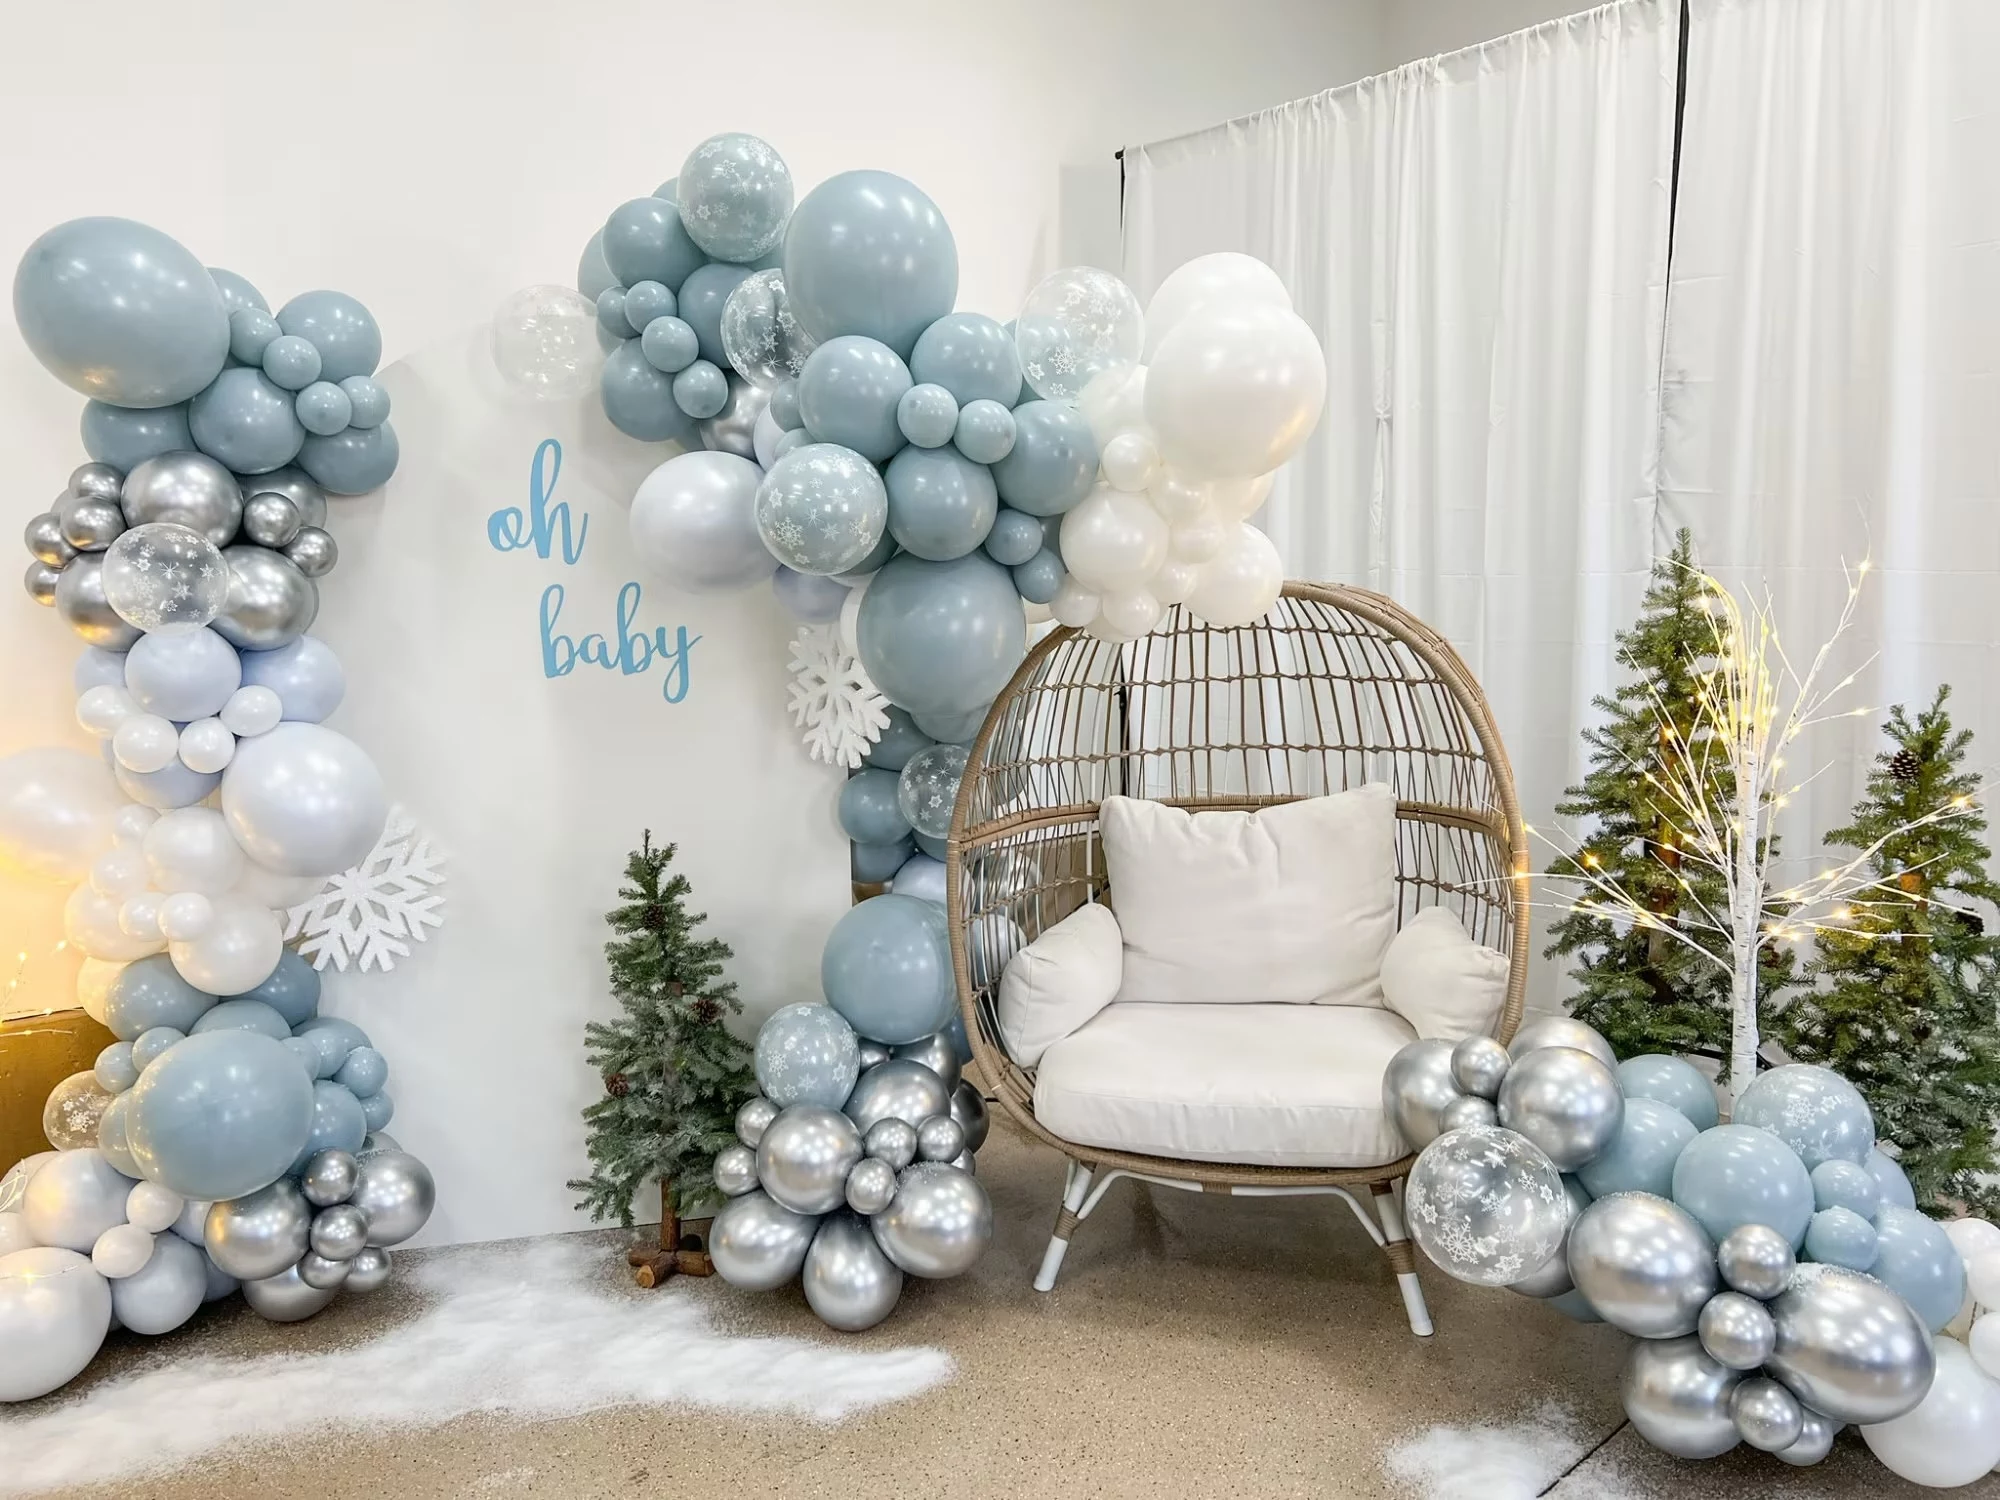 winter baby shower themes for a boy.jpg copy